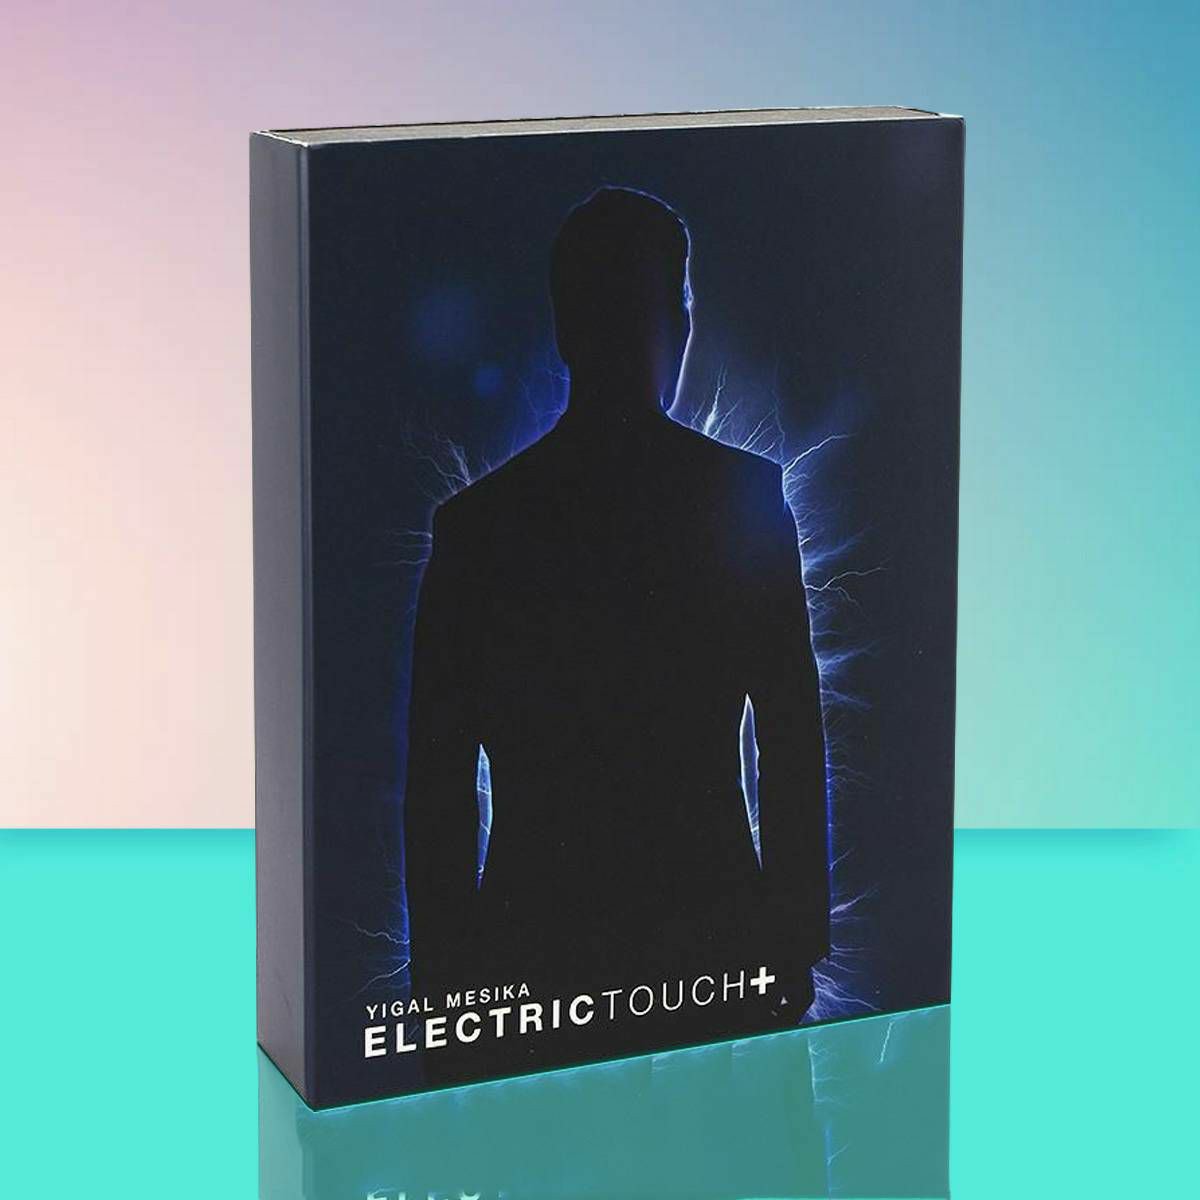 Electric Touch+ by Yigal Mesika